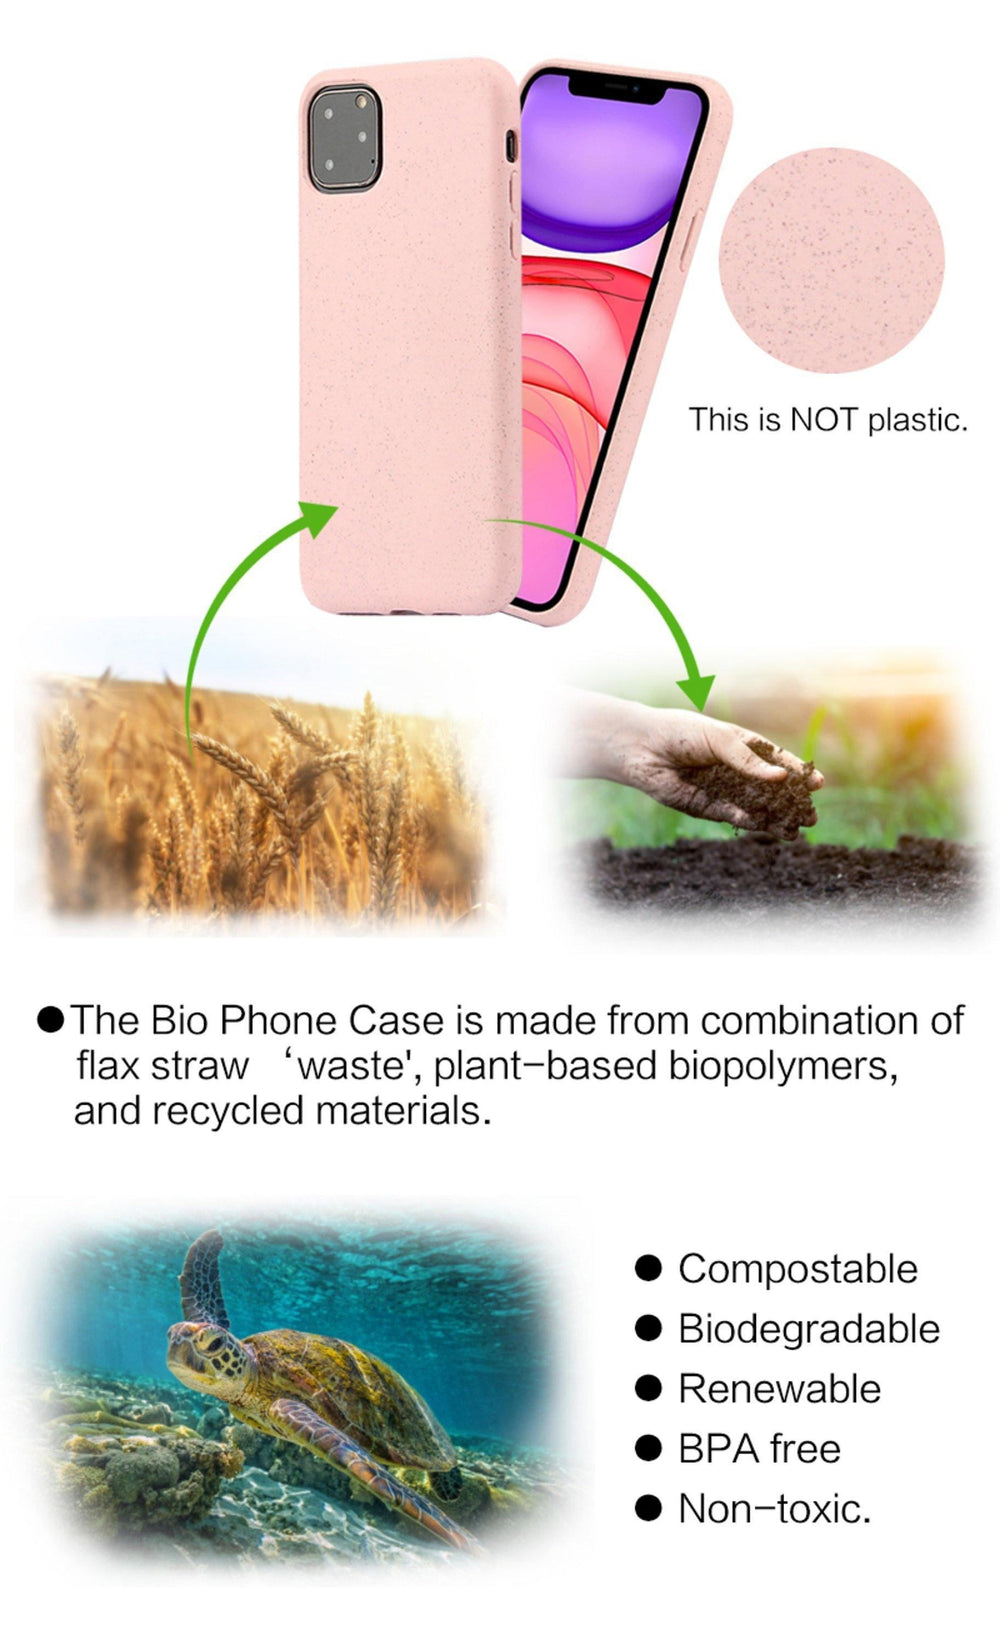 Biodegradable Wheat Straw iPhone Case - Army Green - huemabe - Creative Home Decor